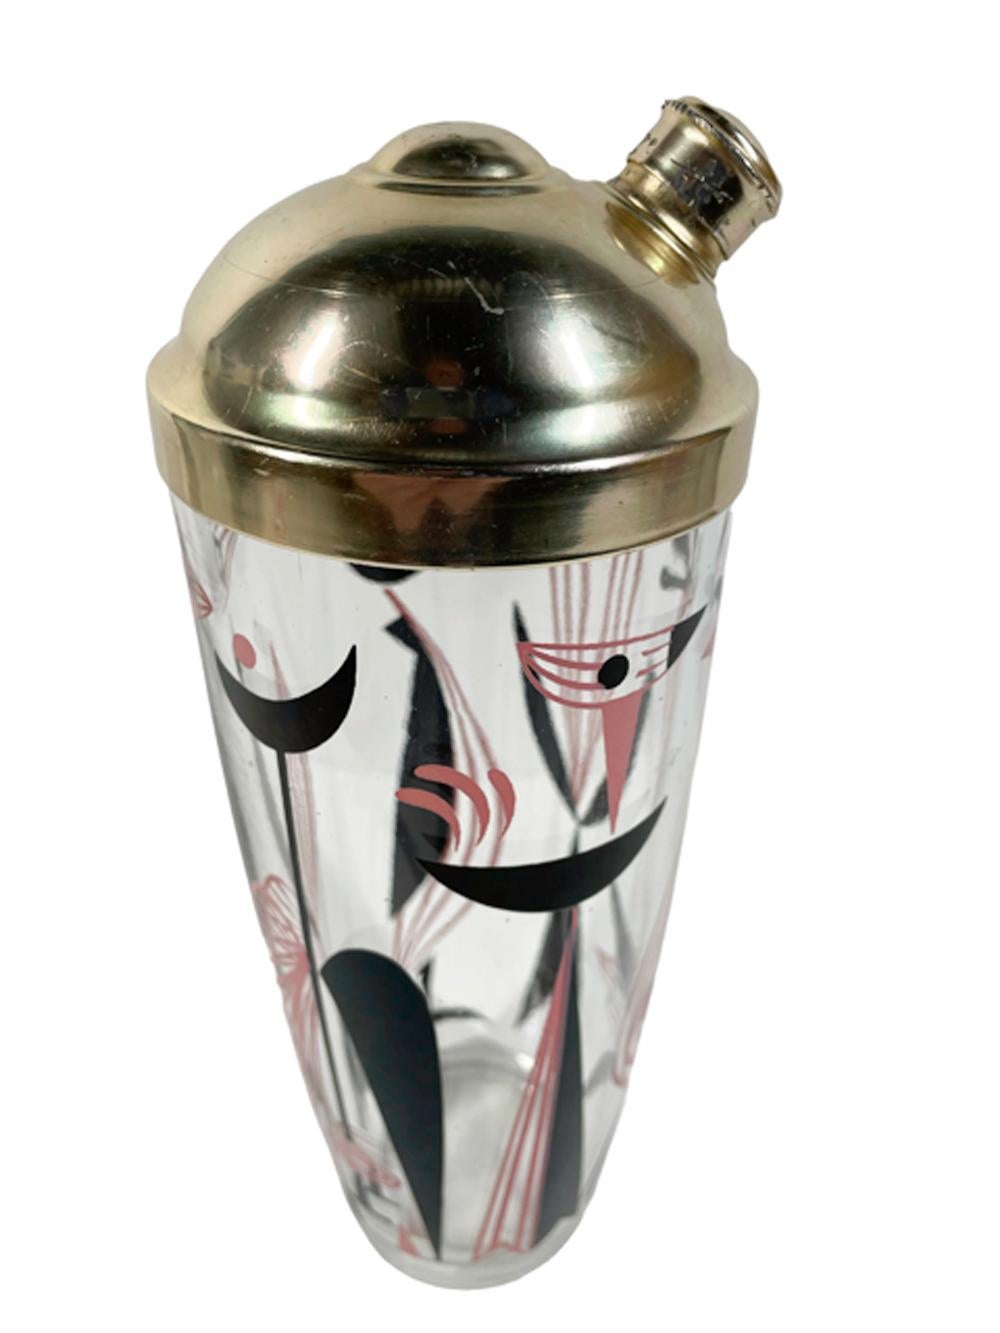 American Vintage Atomic Period Dyball Cocktail Shaker w/Black and Pink Stylized Birds For Sale